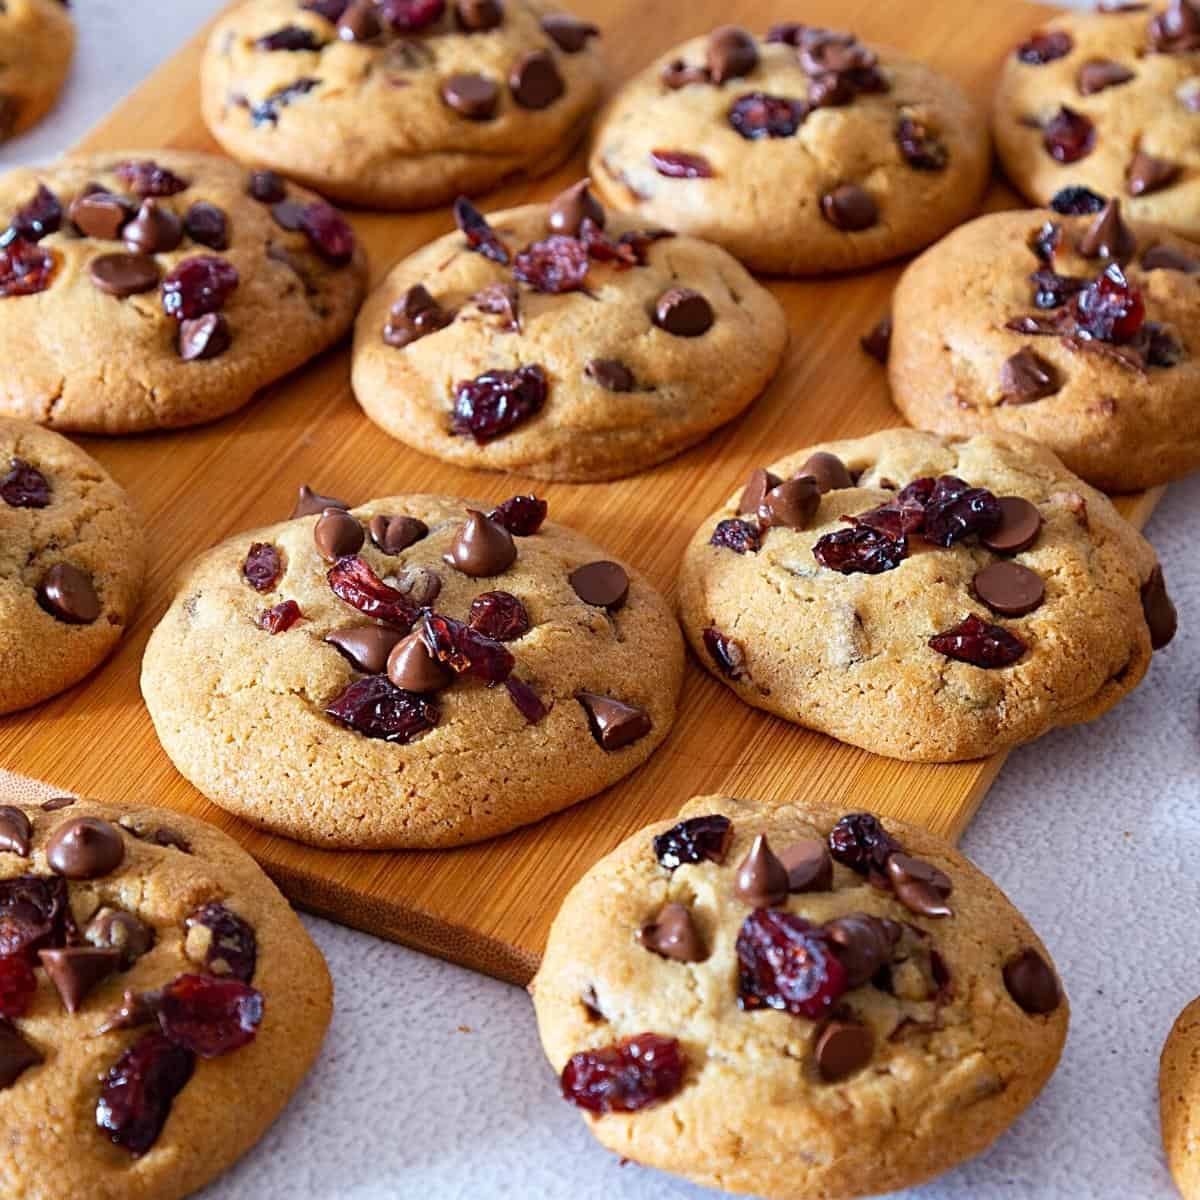 Cranberry cookies with chocolate chips on a wooden board.